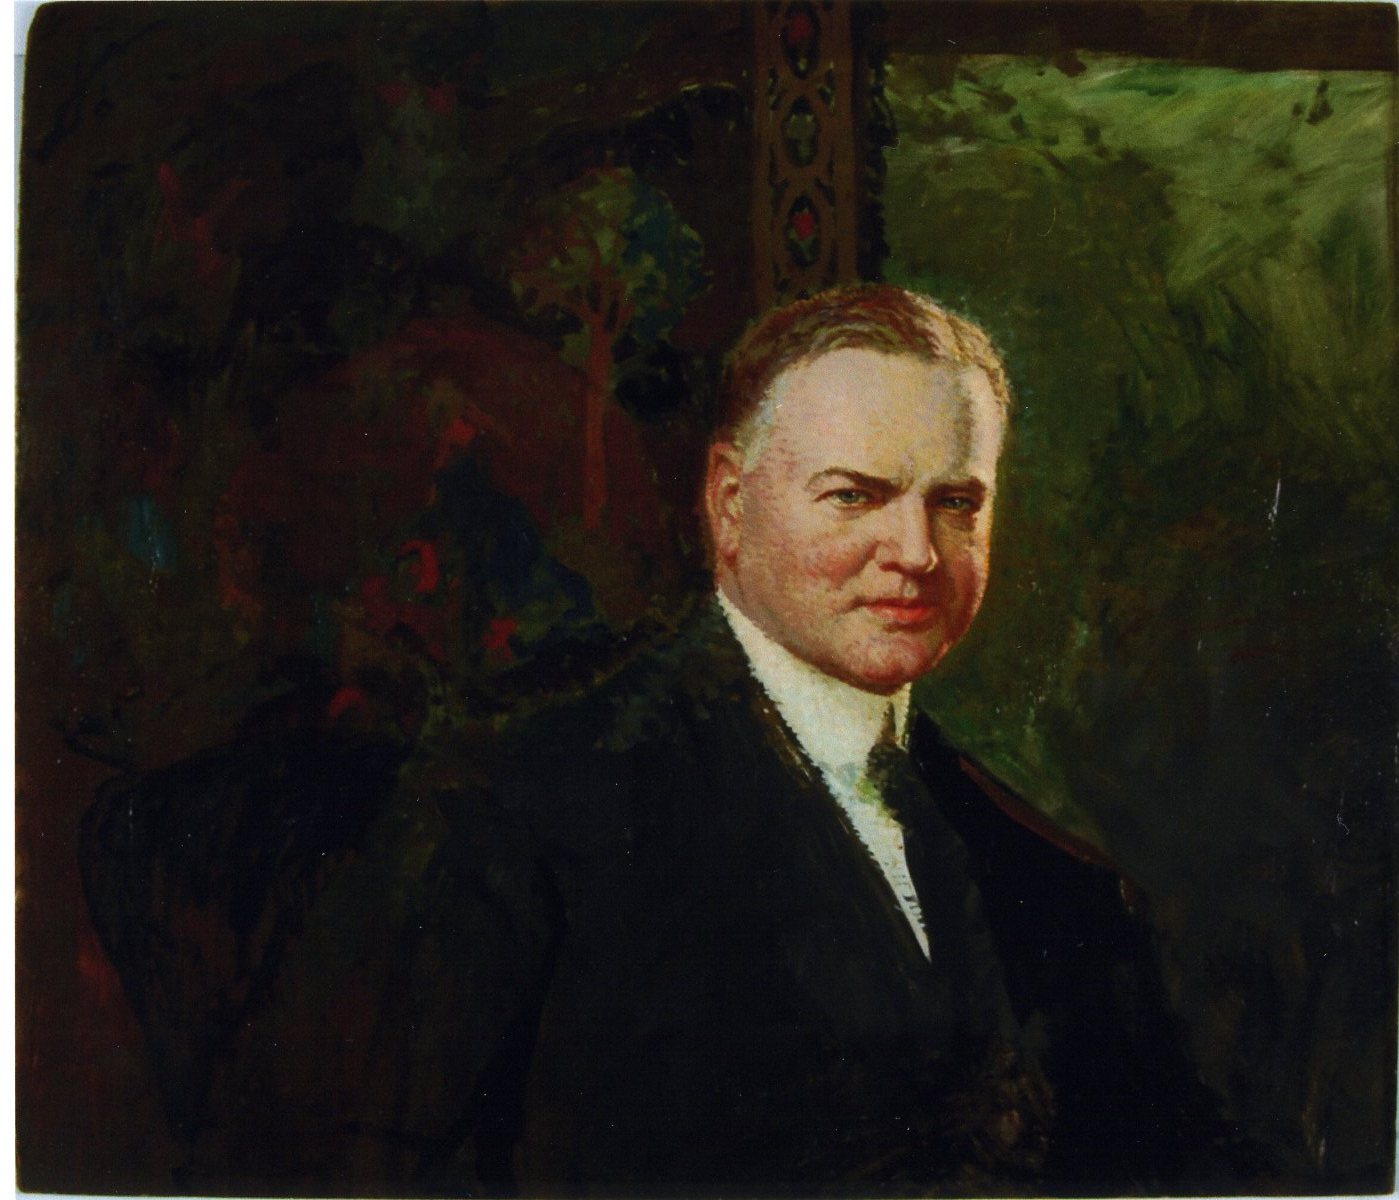 Herbert Hoover, 31st President of the United States (U.S. National Park  Service)